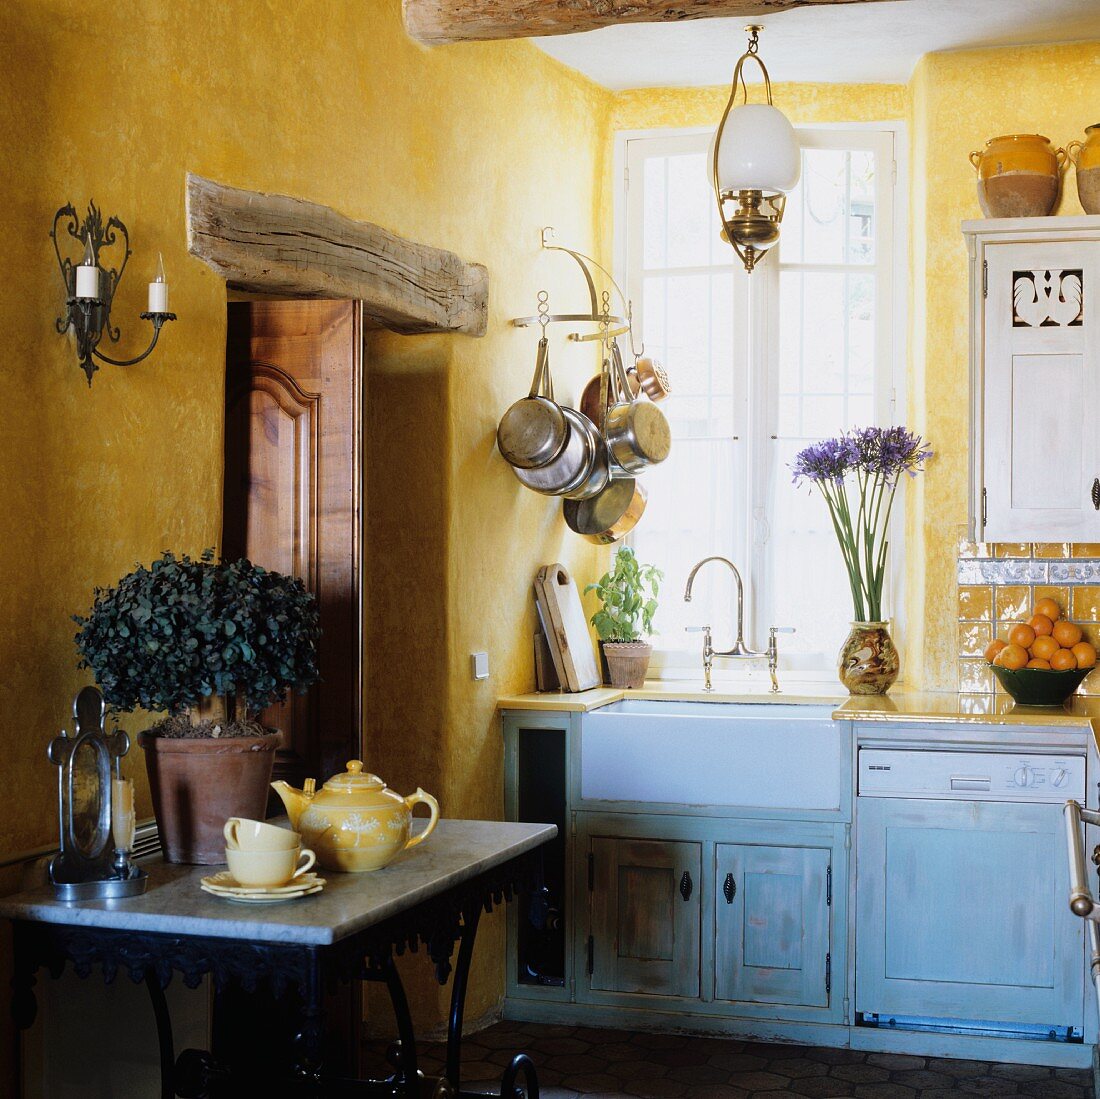 A corner of a country house kitchen with yellow walls